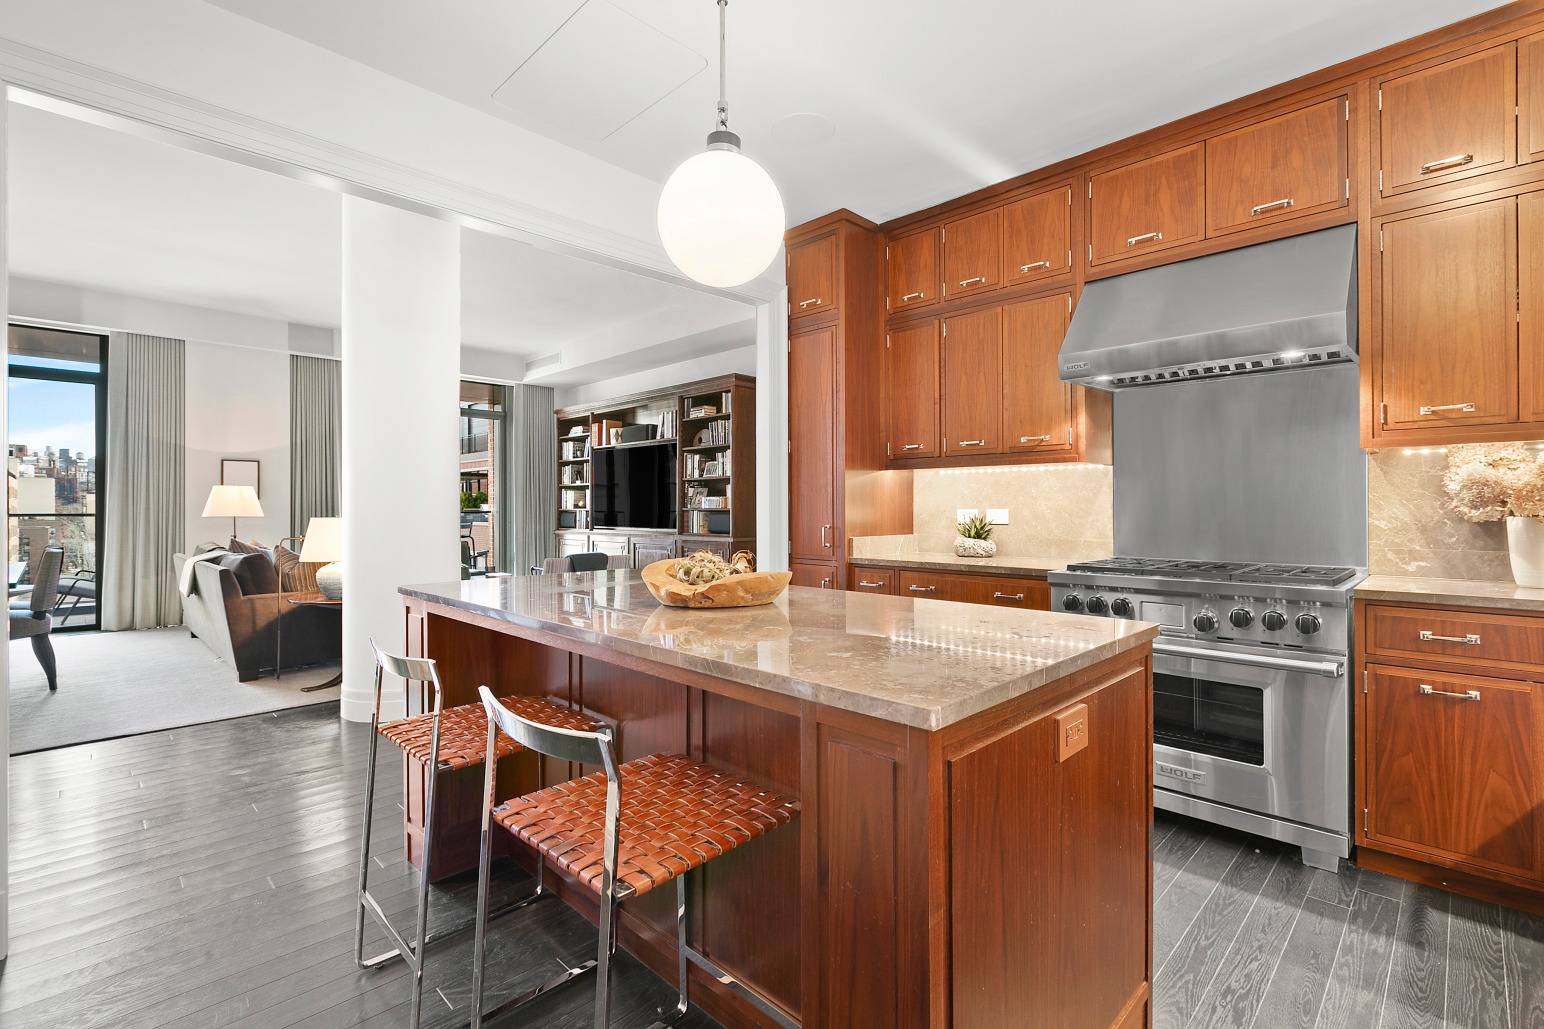 Enjoy new construction splendor in the heart of the historic West Village in this immaculate three bedroom, three and half bedroom home with private outdoor space at the revered Greenwich ...